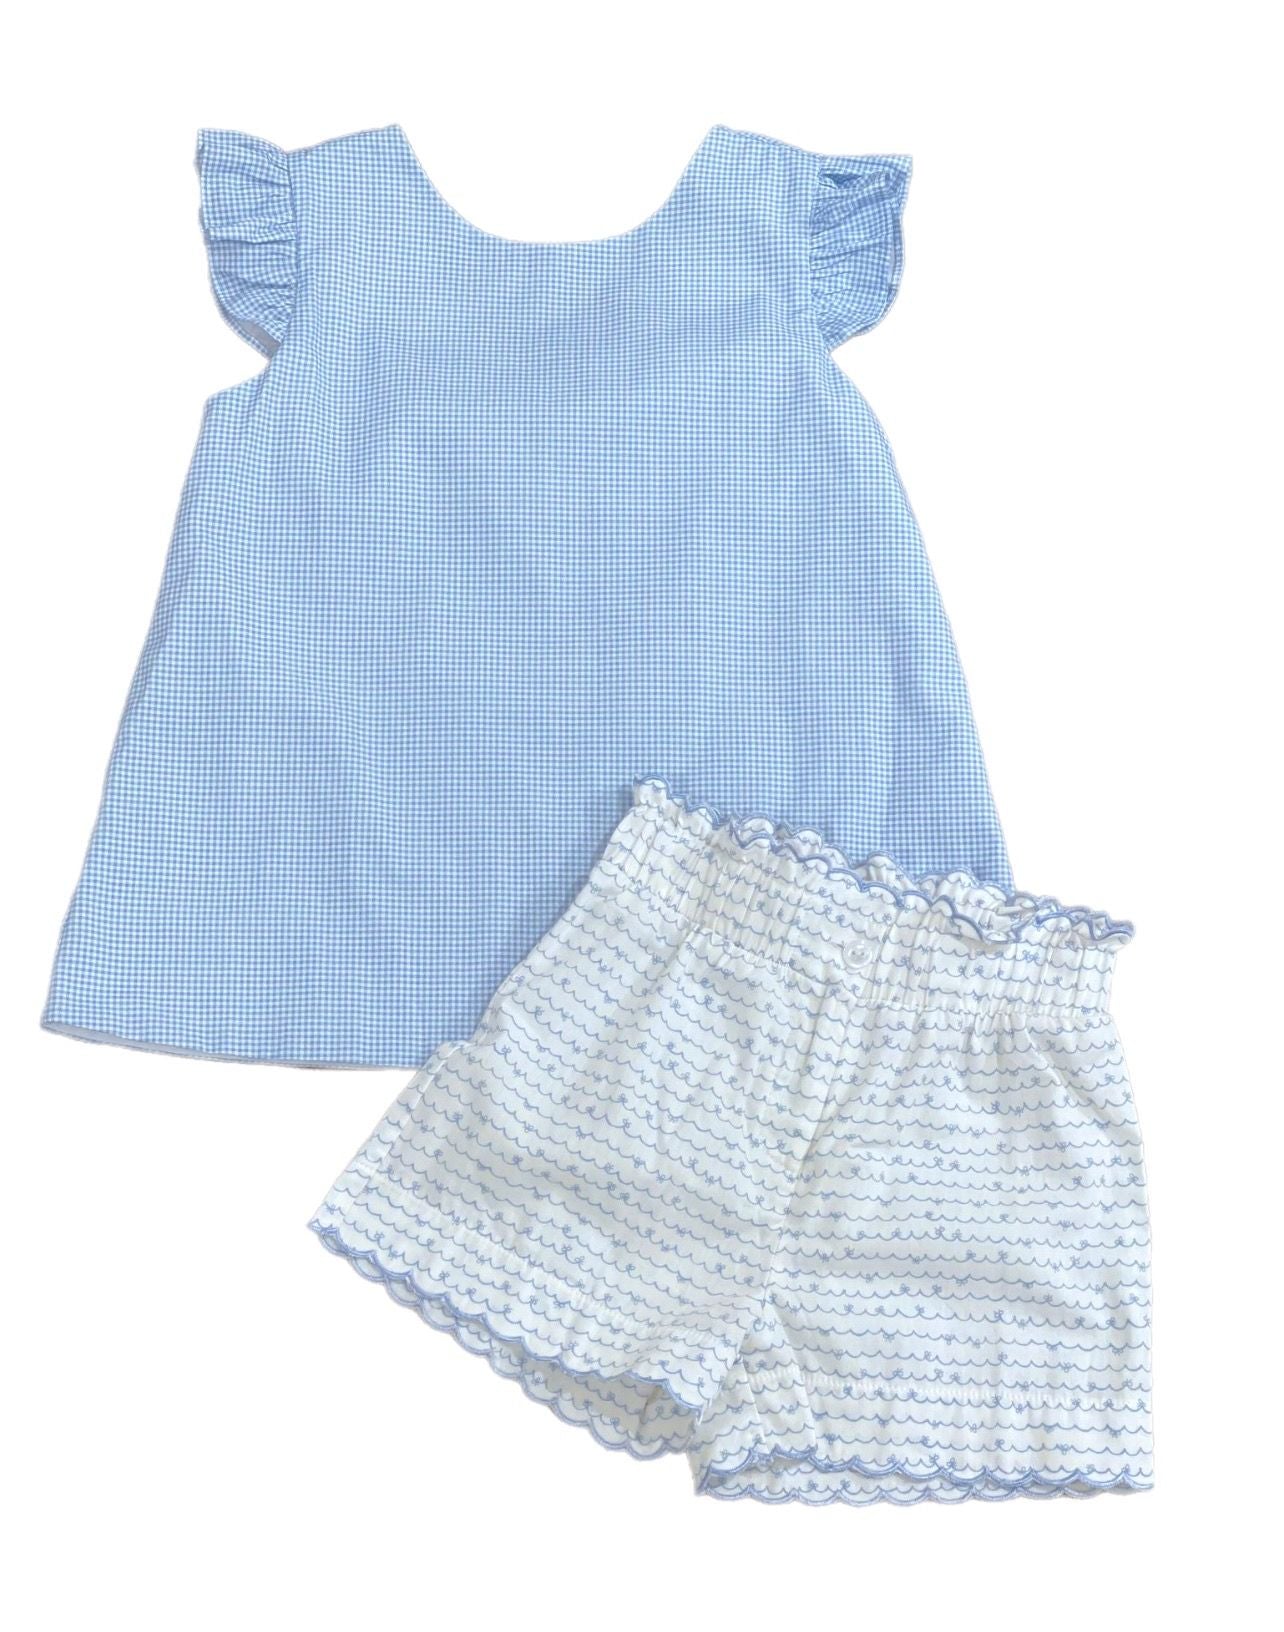 ISABELLA SHORT SET - BLUE GINGHAM TOP W/BACK BOW IN BLUE BOW AND SHORTS